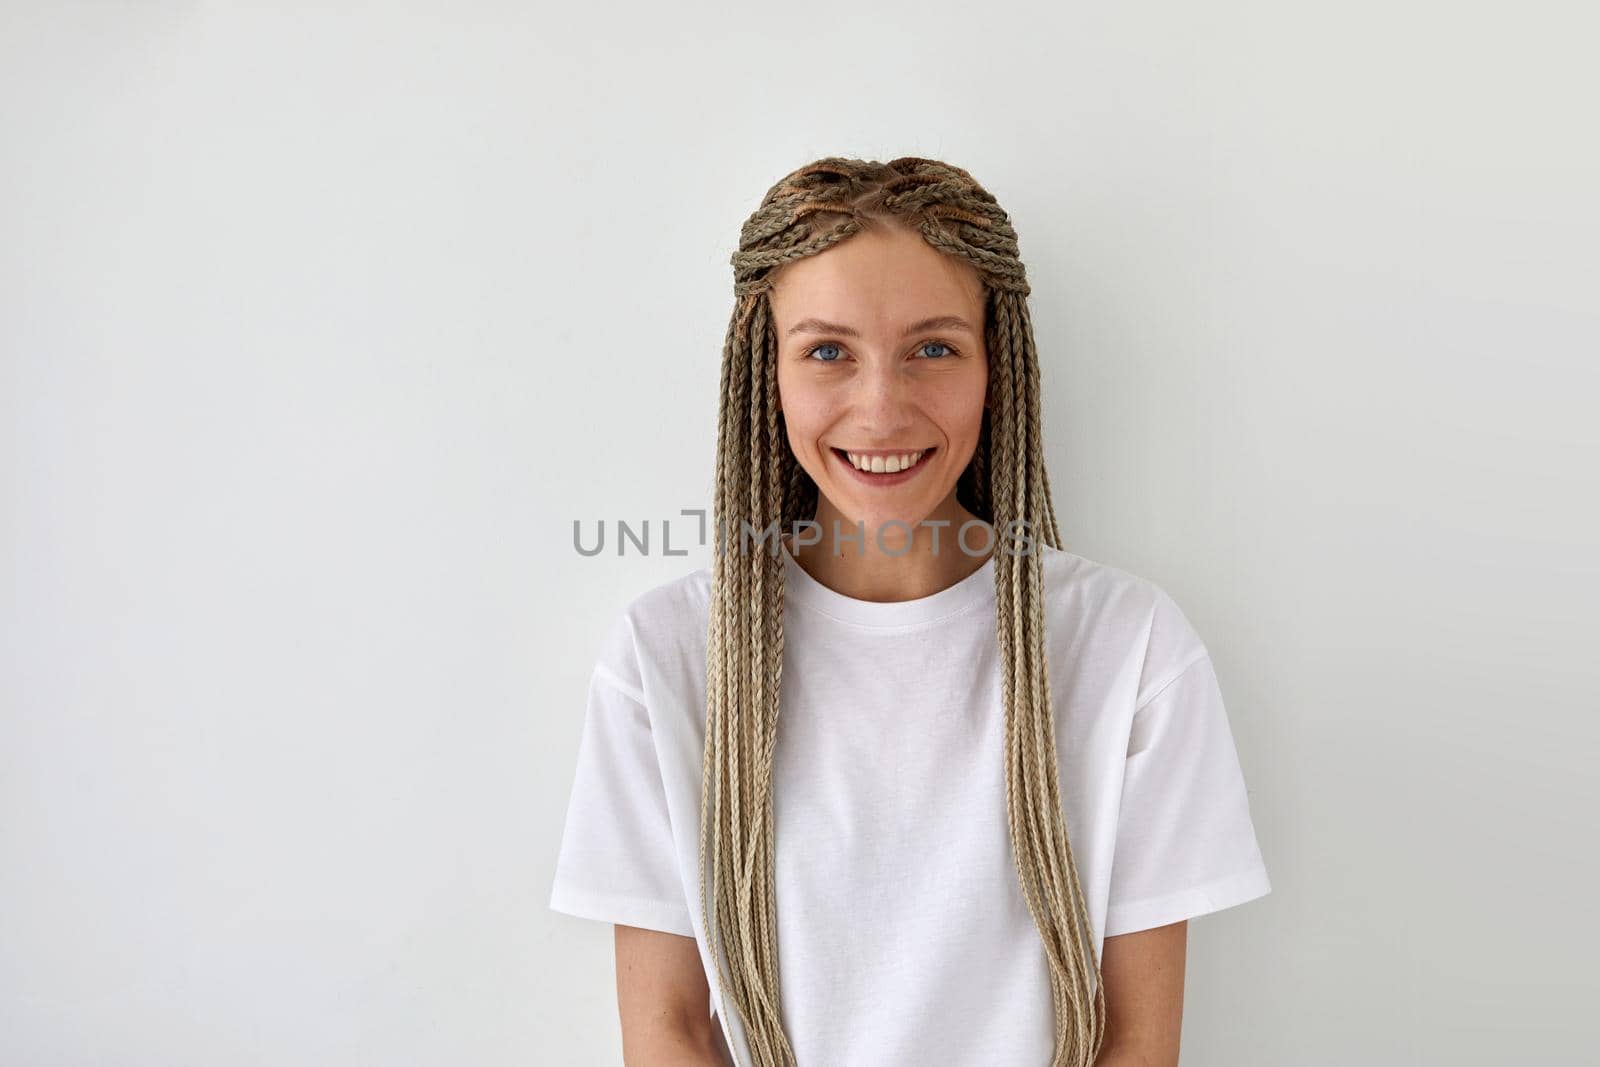 Smiling woman with braids standing on white background by Demkat